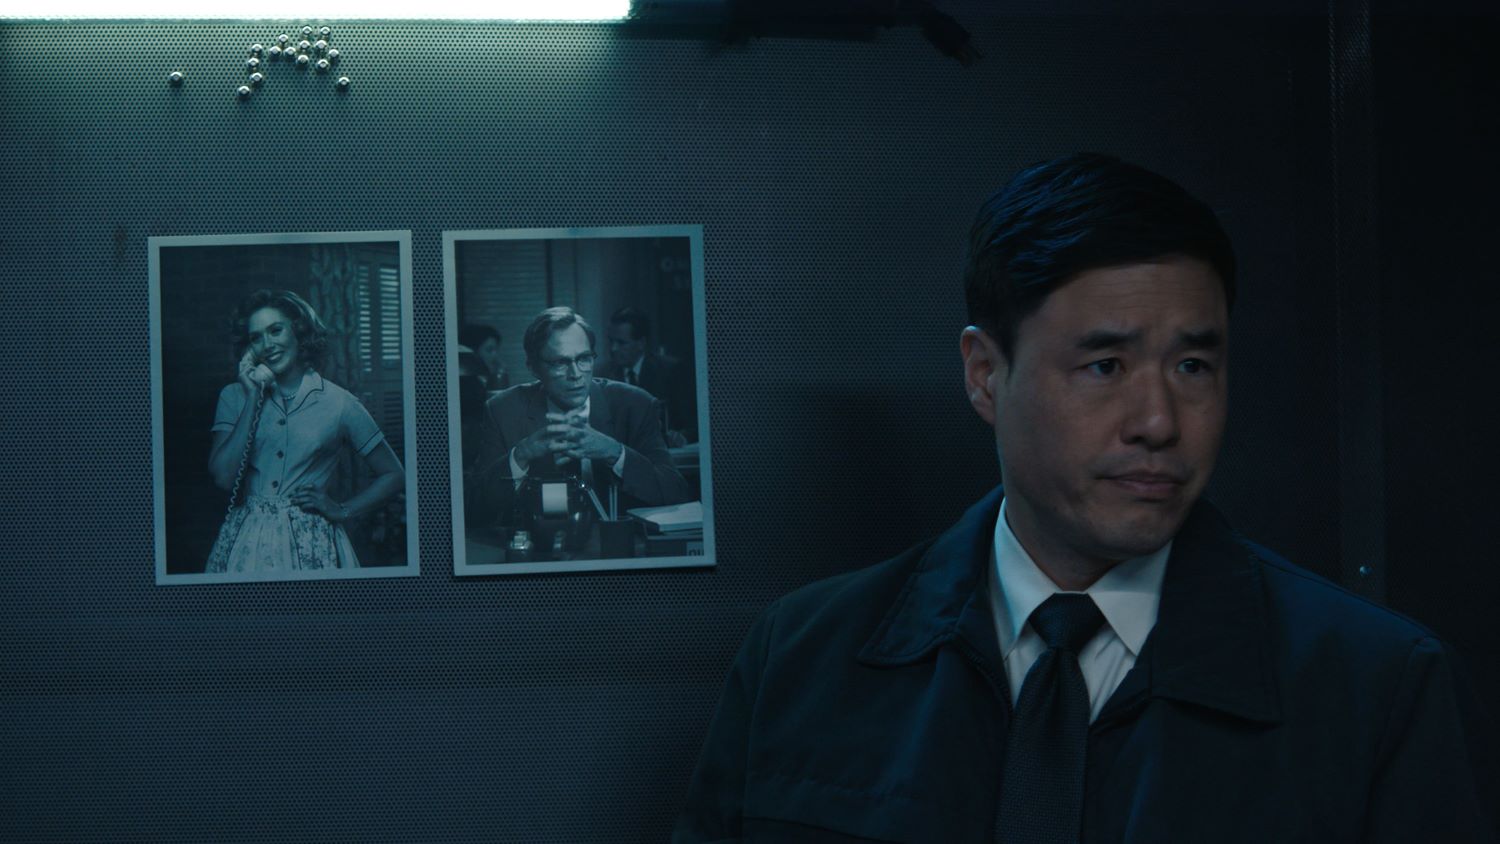 Randall Park in standing in front of photos of Wanda and Vision in 'WandaVision'